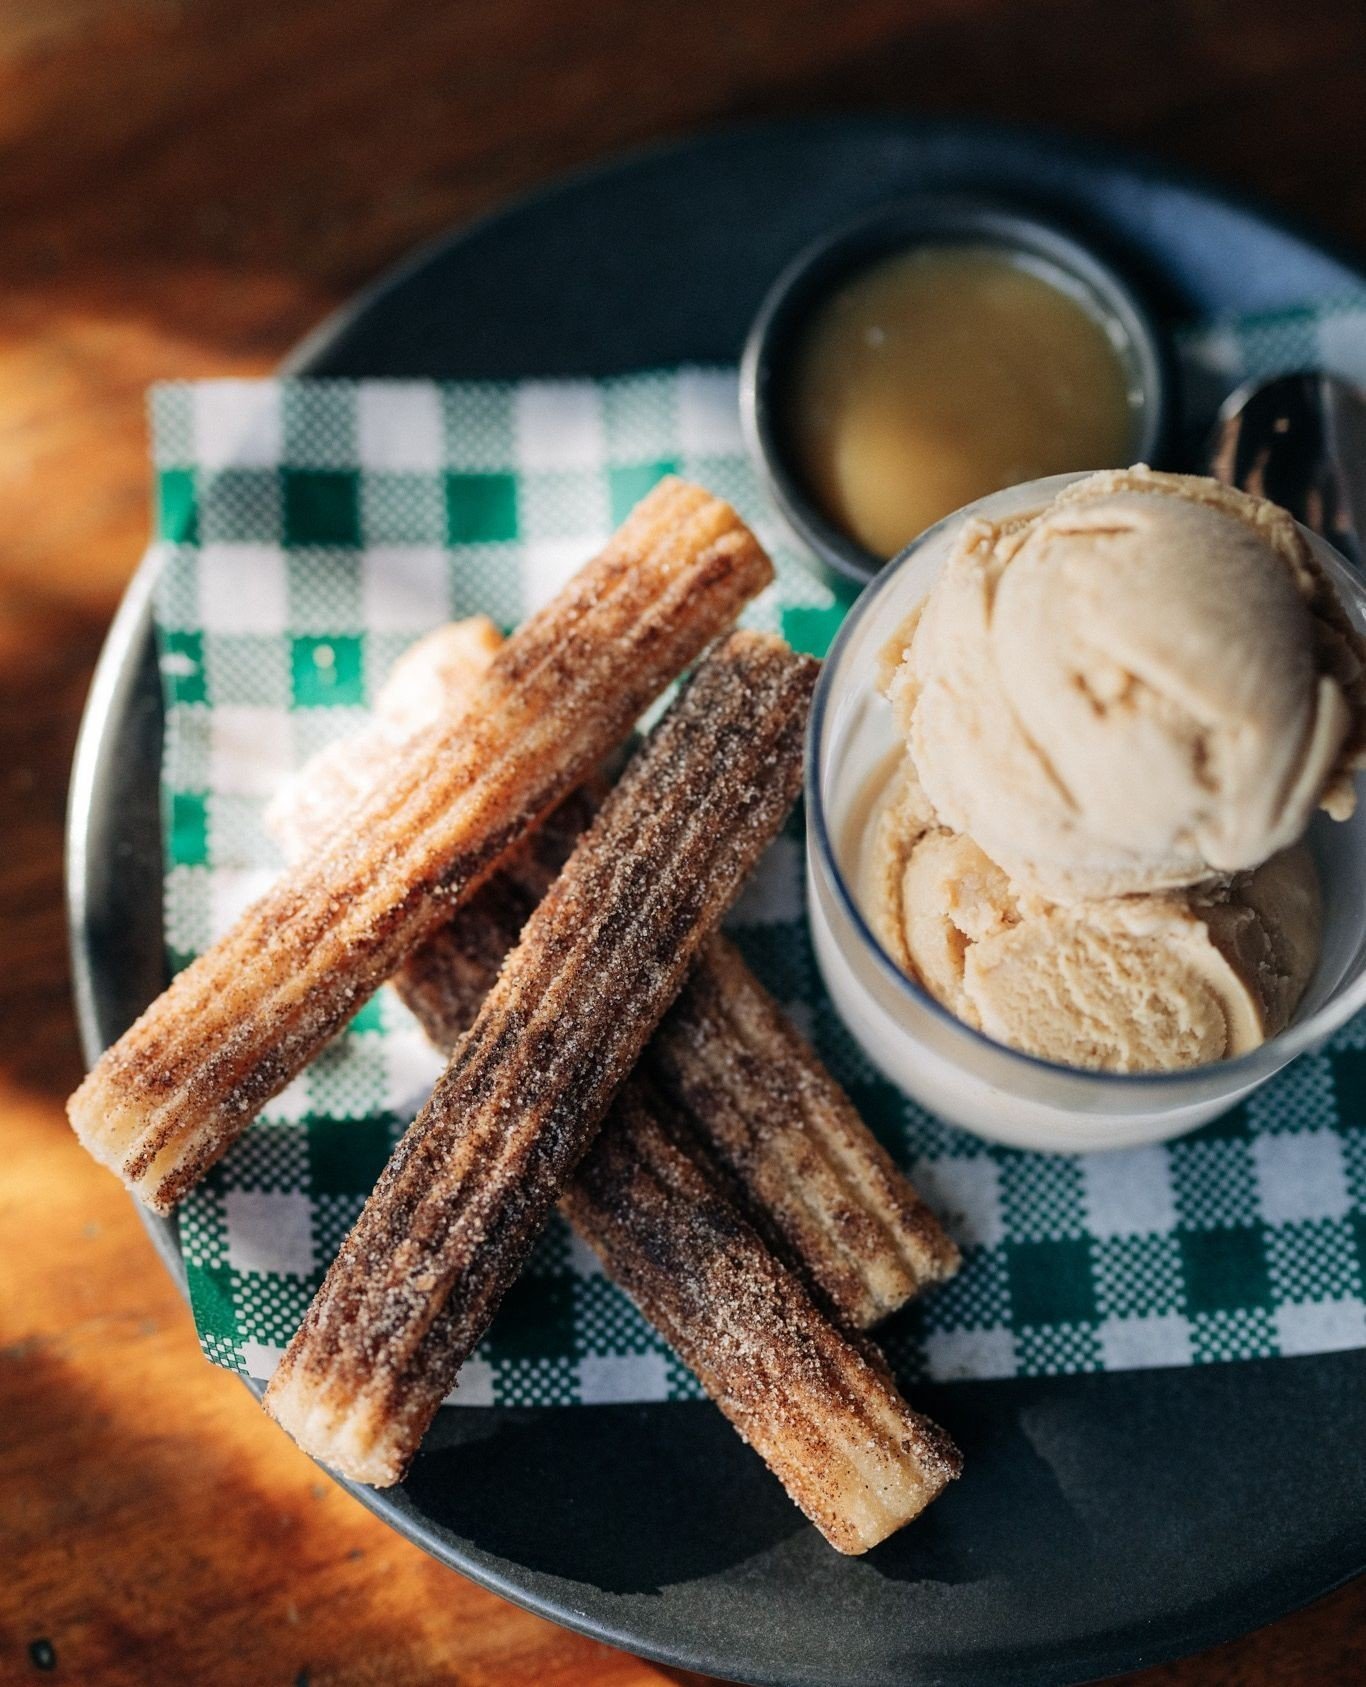 Who can say no to churros?! End your week the right way with dinner and dessert at Parry St Garage. Book online now! 🙌 #parrystgarage